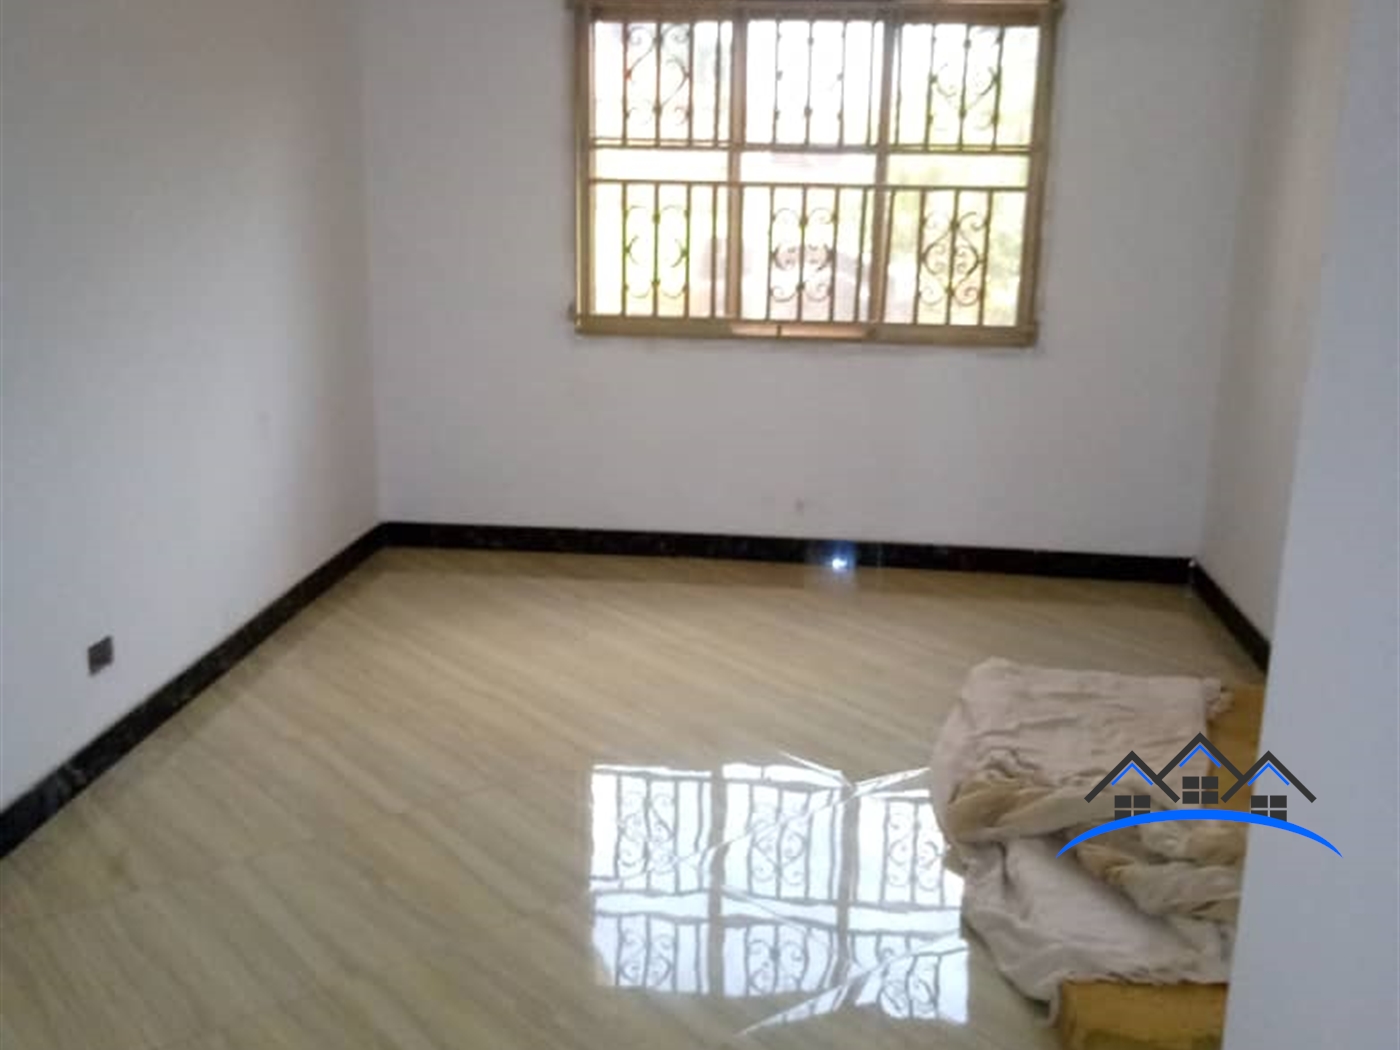 Bungalow for sale in Town Kayunga